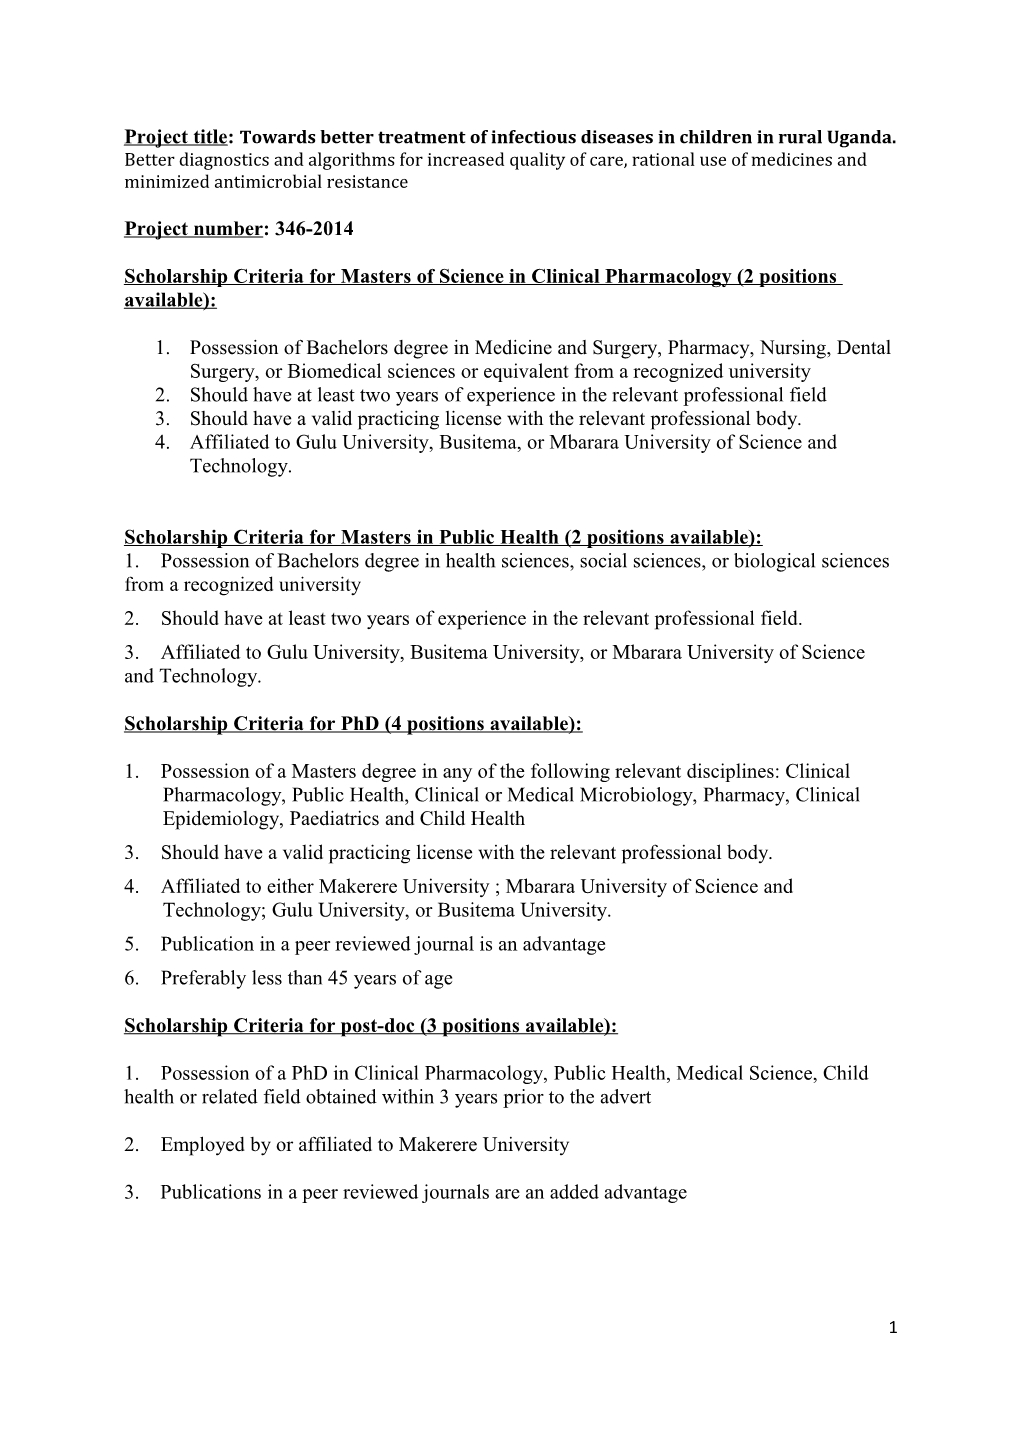 Scholarship Criteria for Masters of Science in Clinical Pharmacology (2 Positions Available)